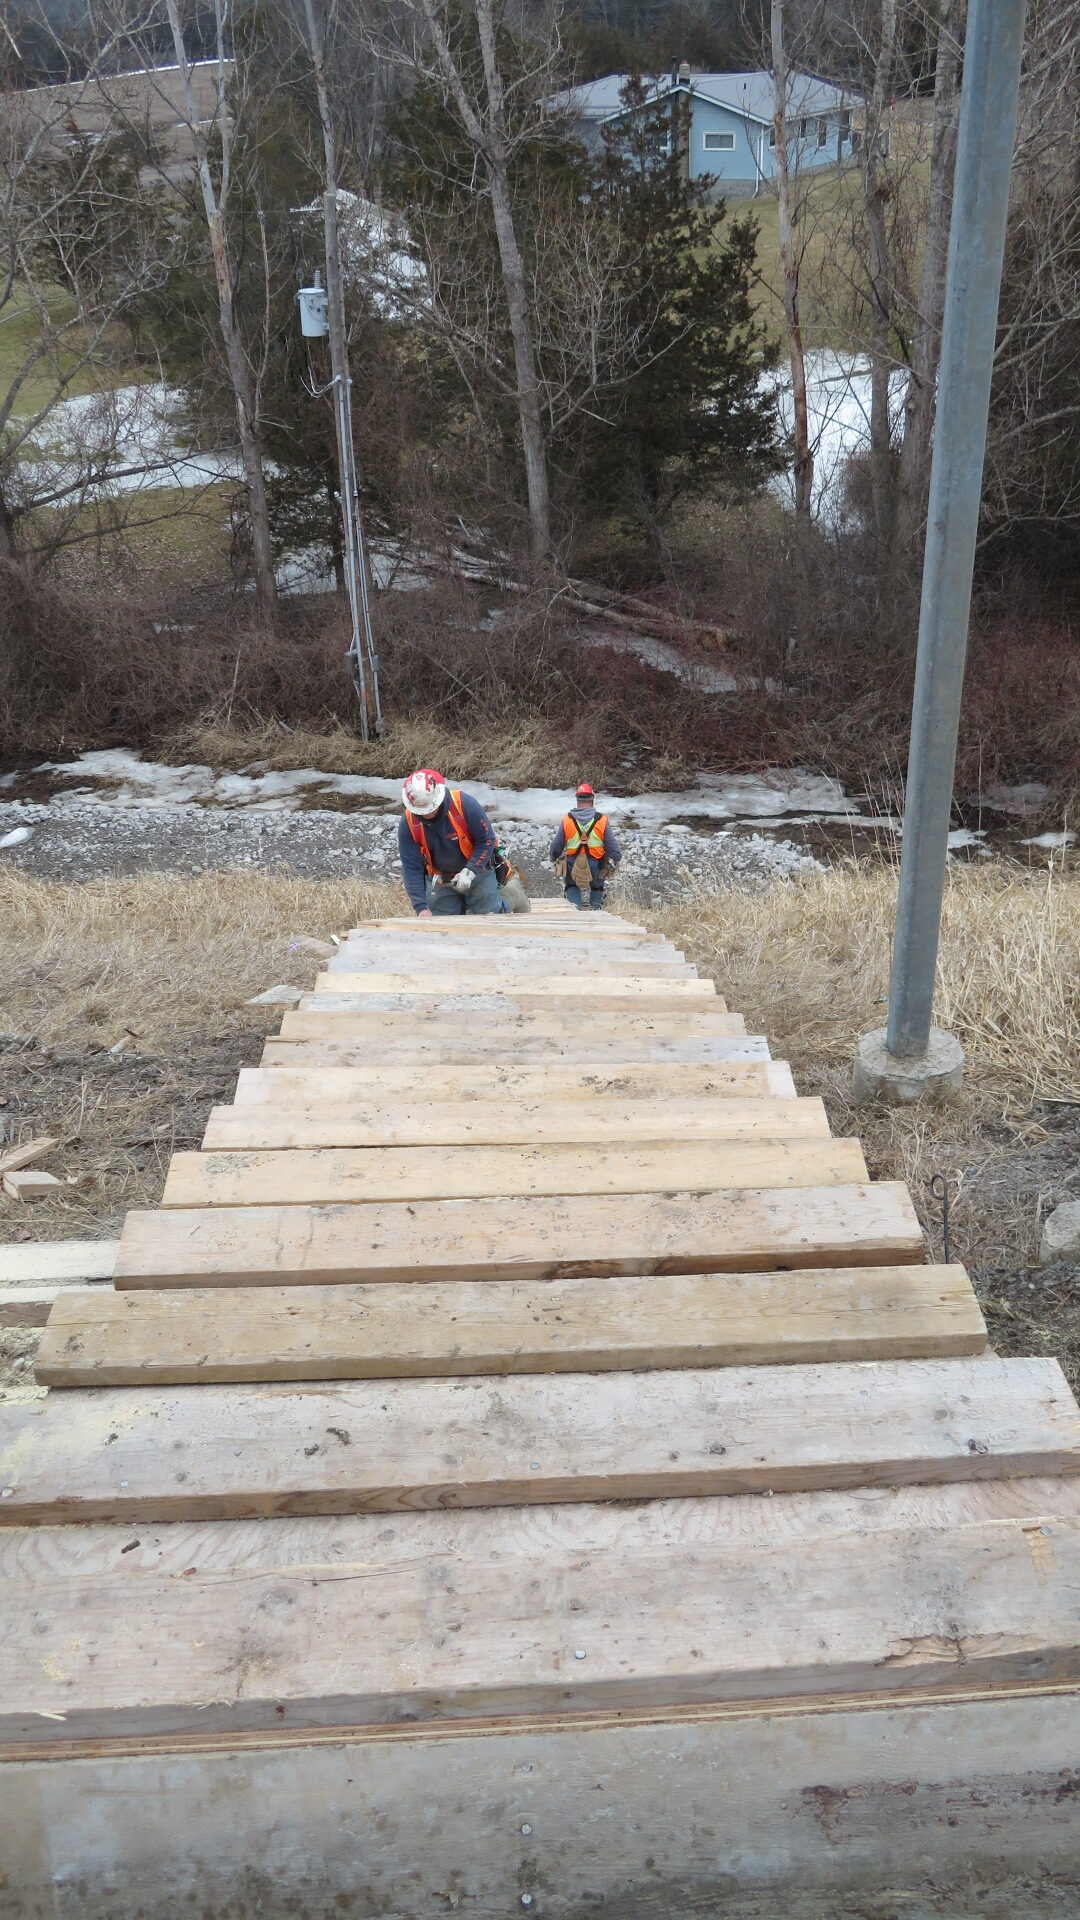 Building stairs for access to the bridge deck